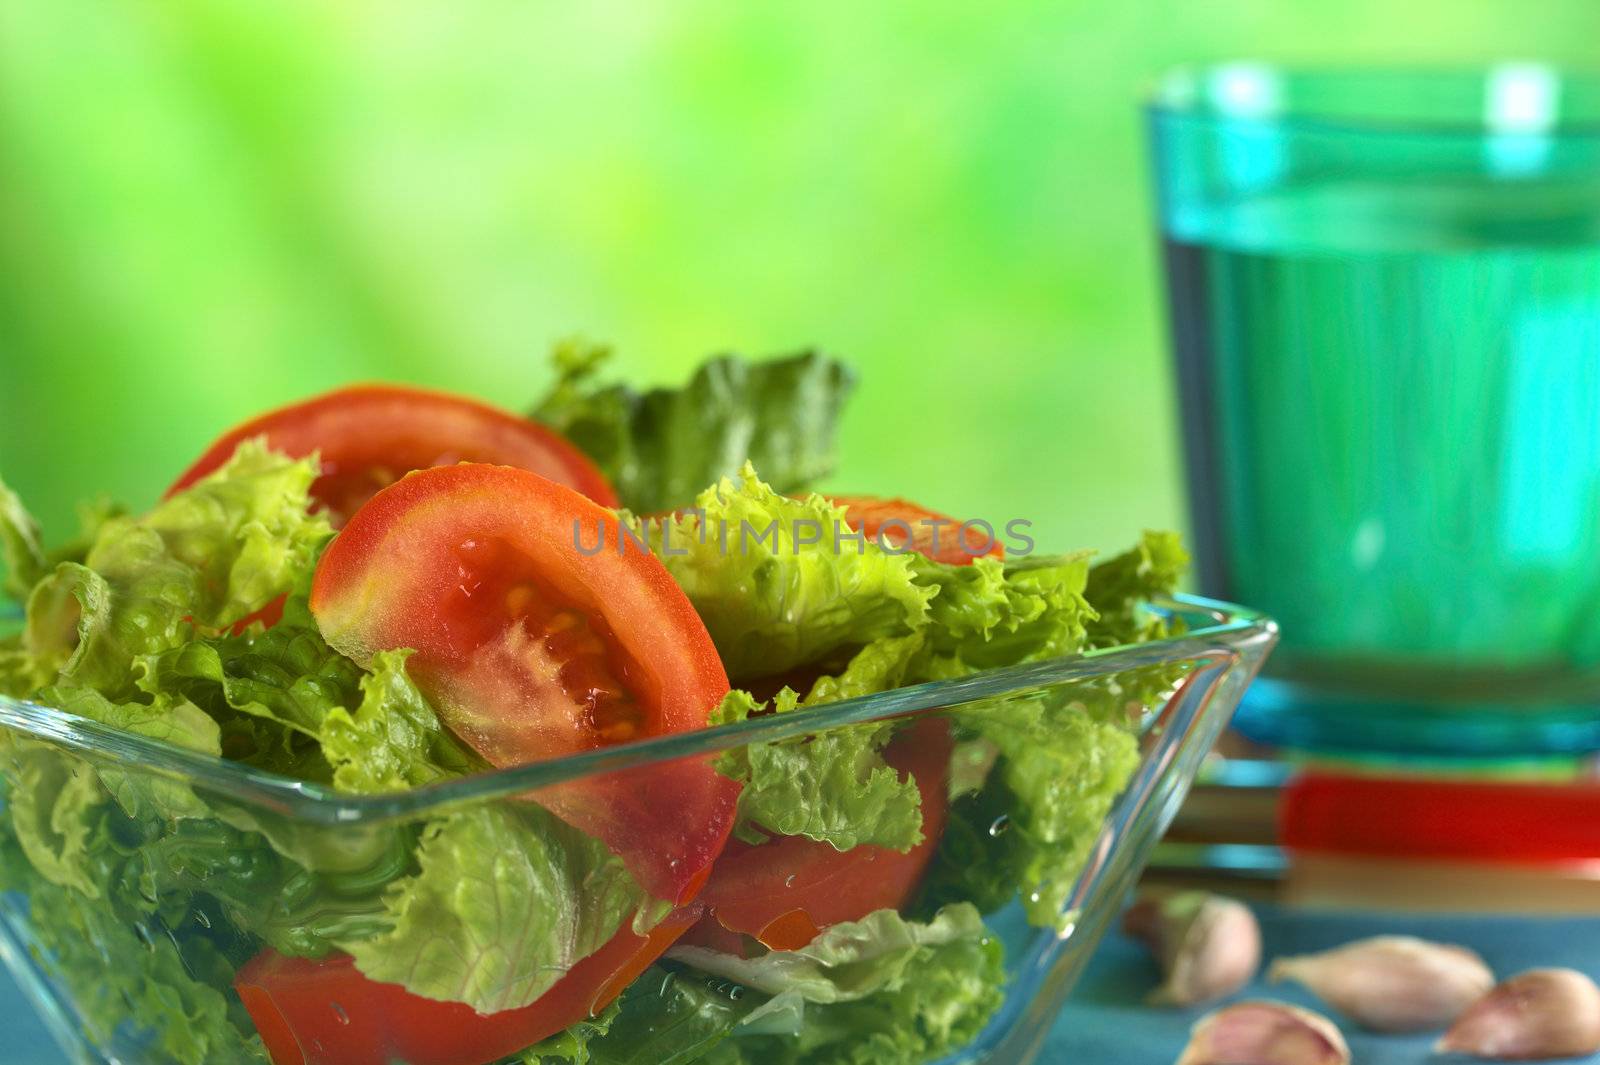 Fresh salad of lettuce and tomato with garlic and a glass of water in the back (Selective Focus, Focus on the tomato slice in the front) 